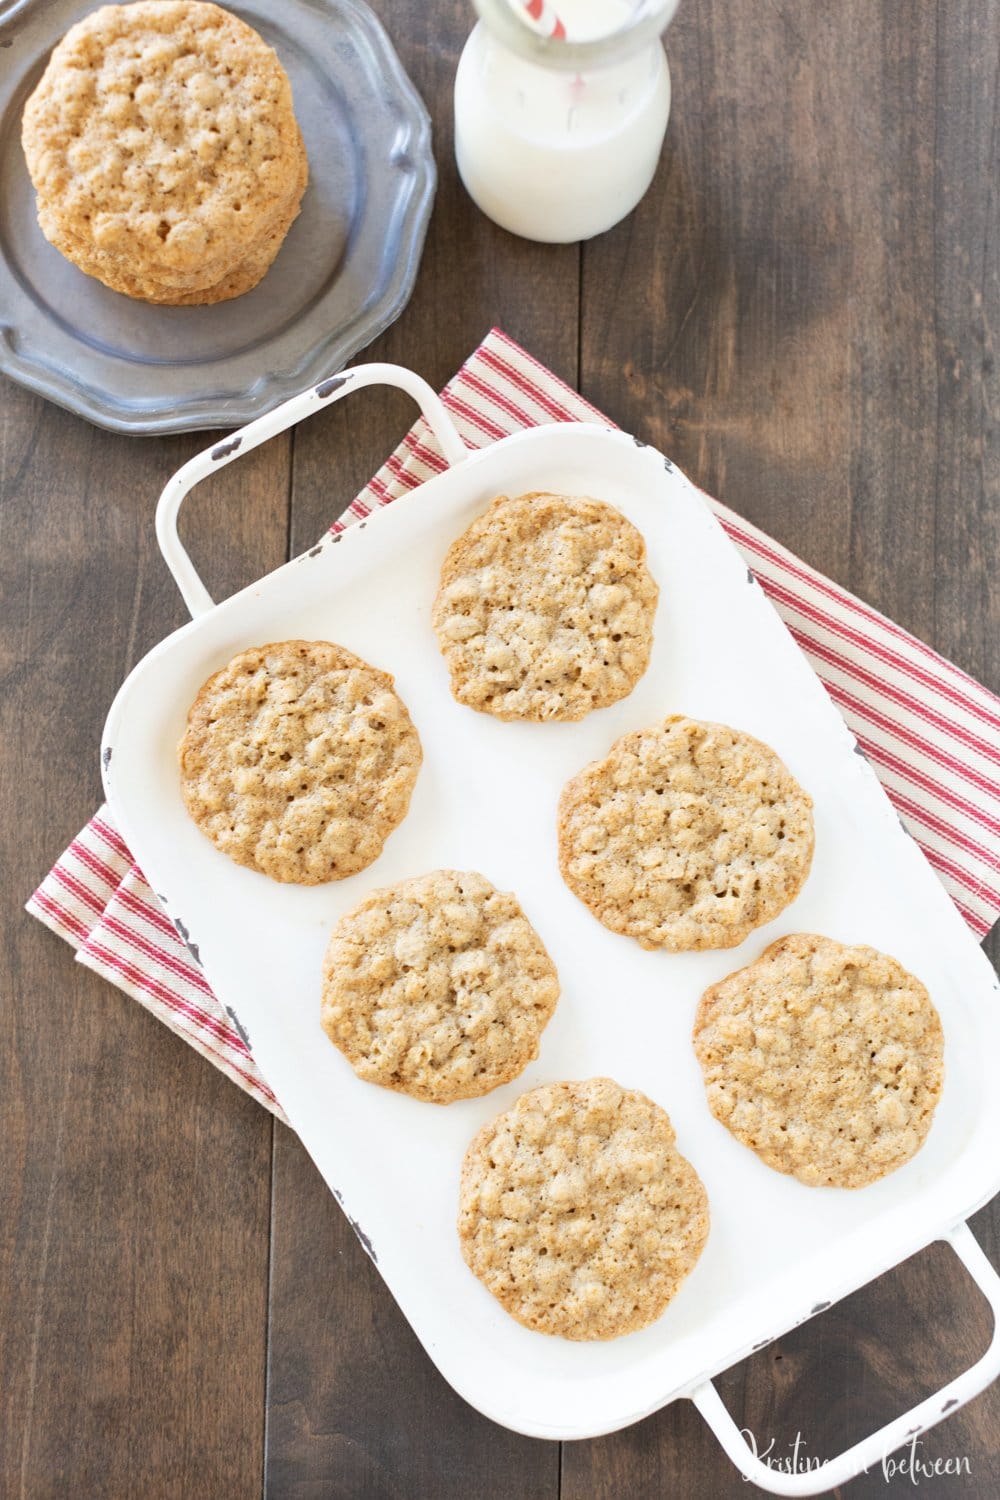 Thin, crispy, chewy, sweet, spicy. That’s how I’d describe these old fashioned oatmeal cookies. They’re pretty much everything you’d expect from a plain oatmeal cookie!